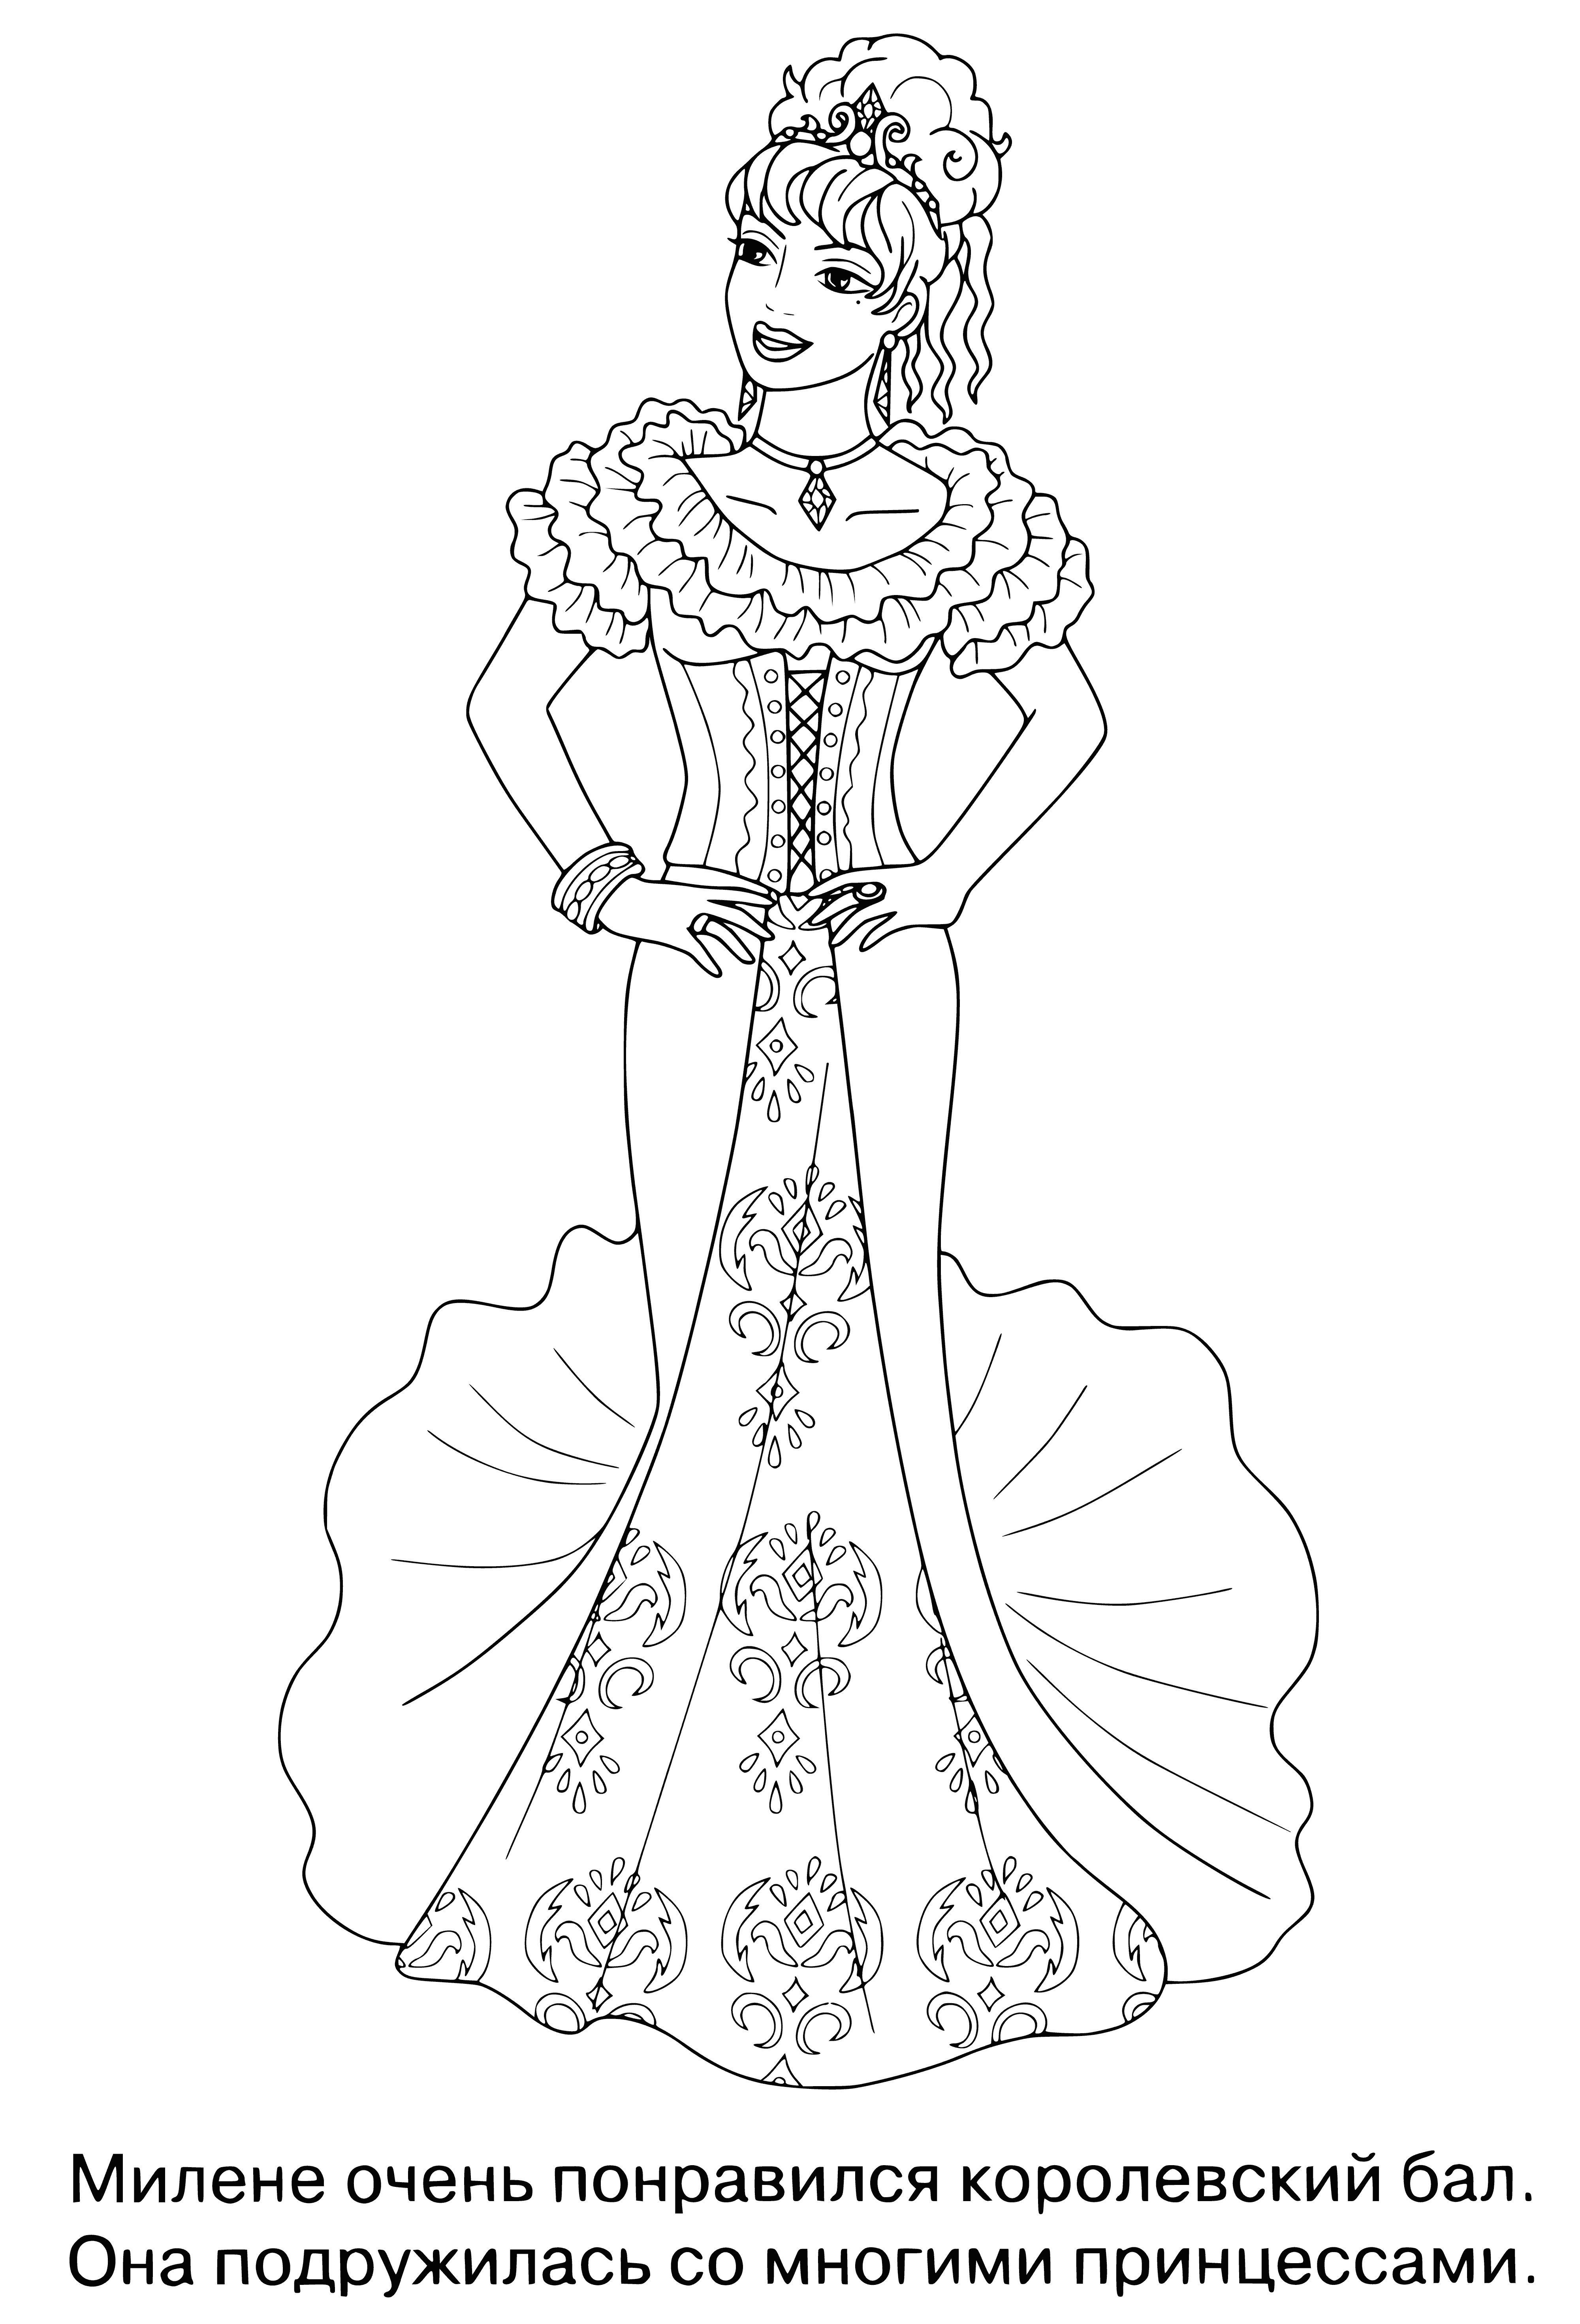 coloring page: Little girl with long blonde hair wears pink dress and tiara, happily coloring a castle.